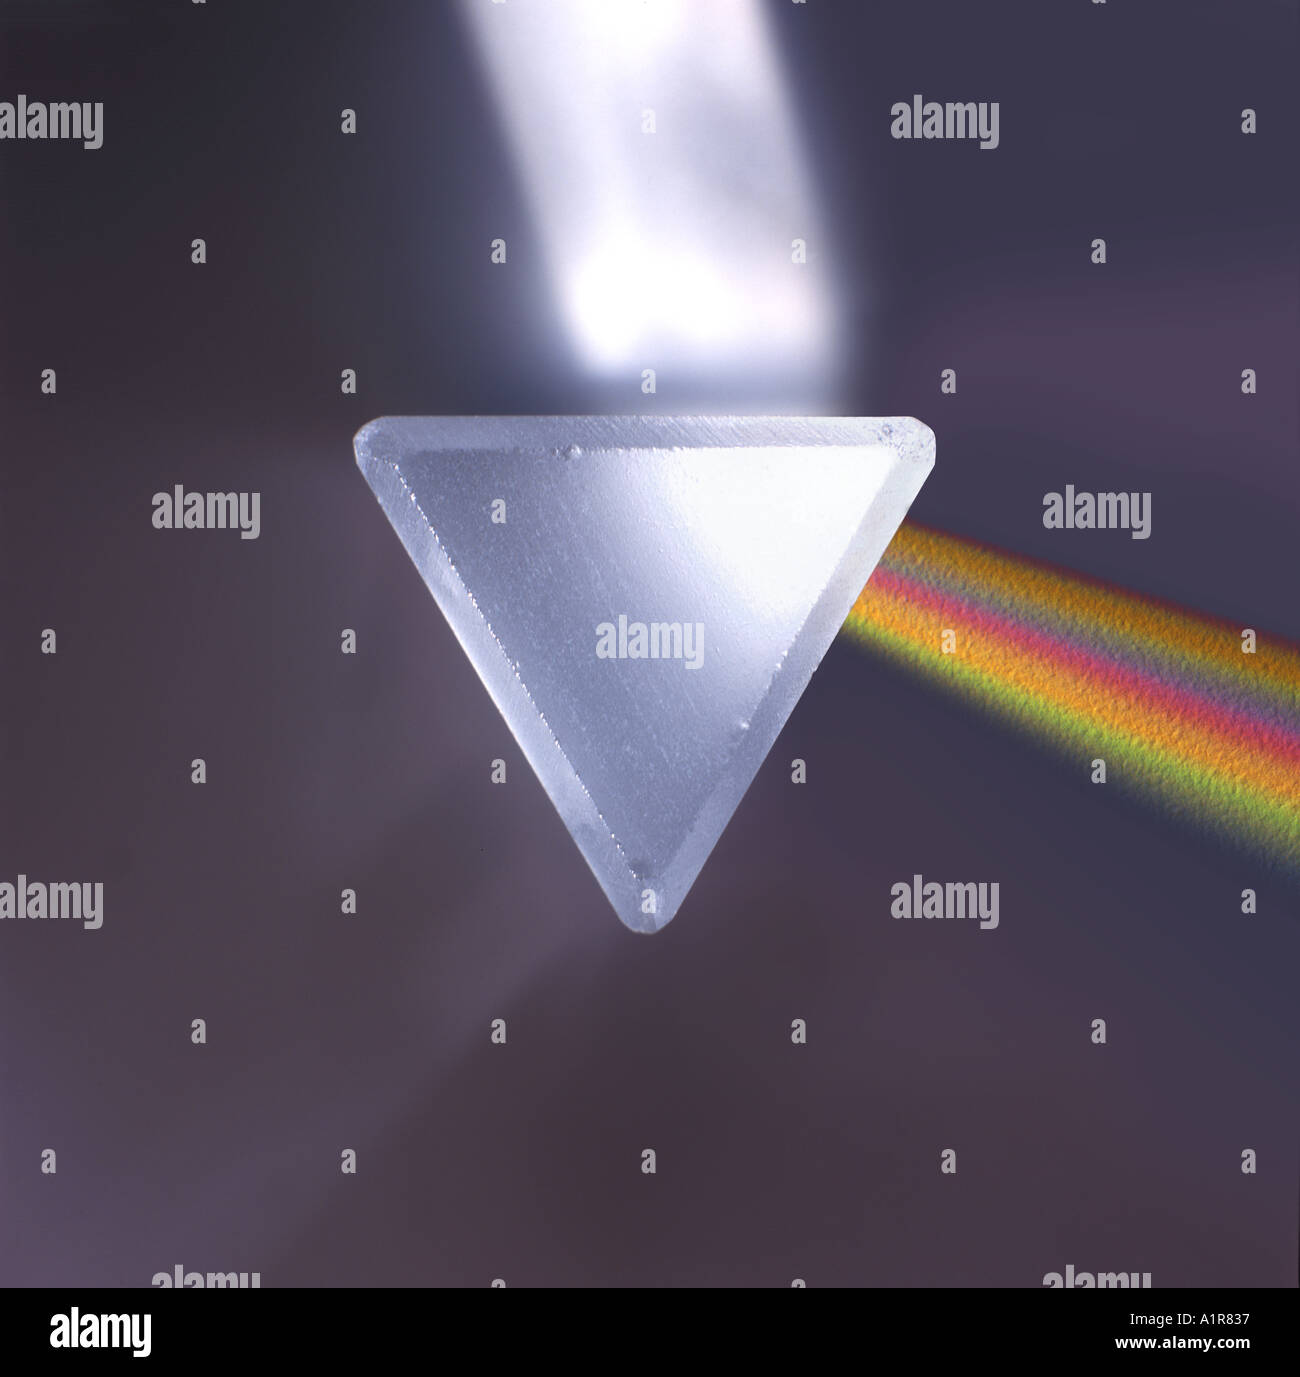 Prism Light With White Light Changing to Color Light Beam Stock Photo